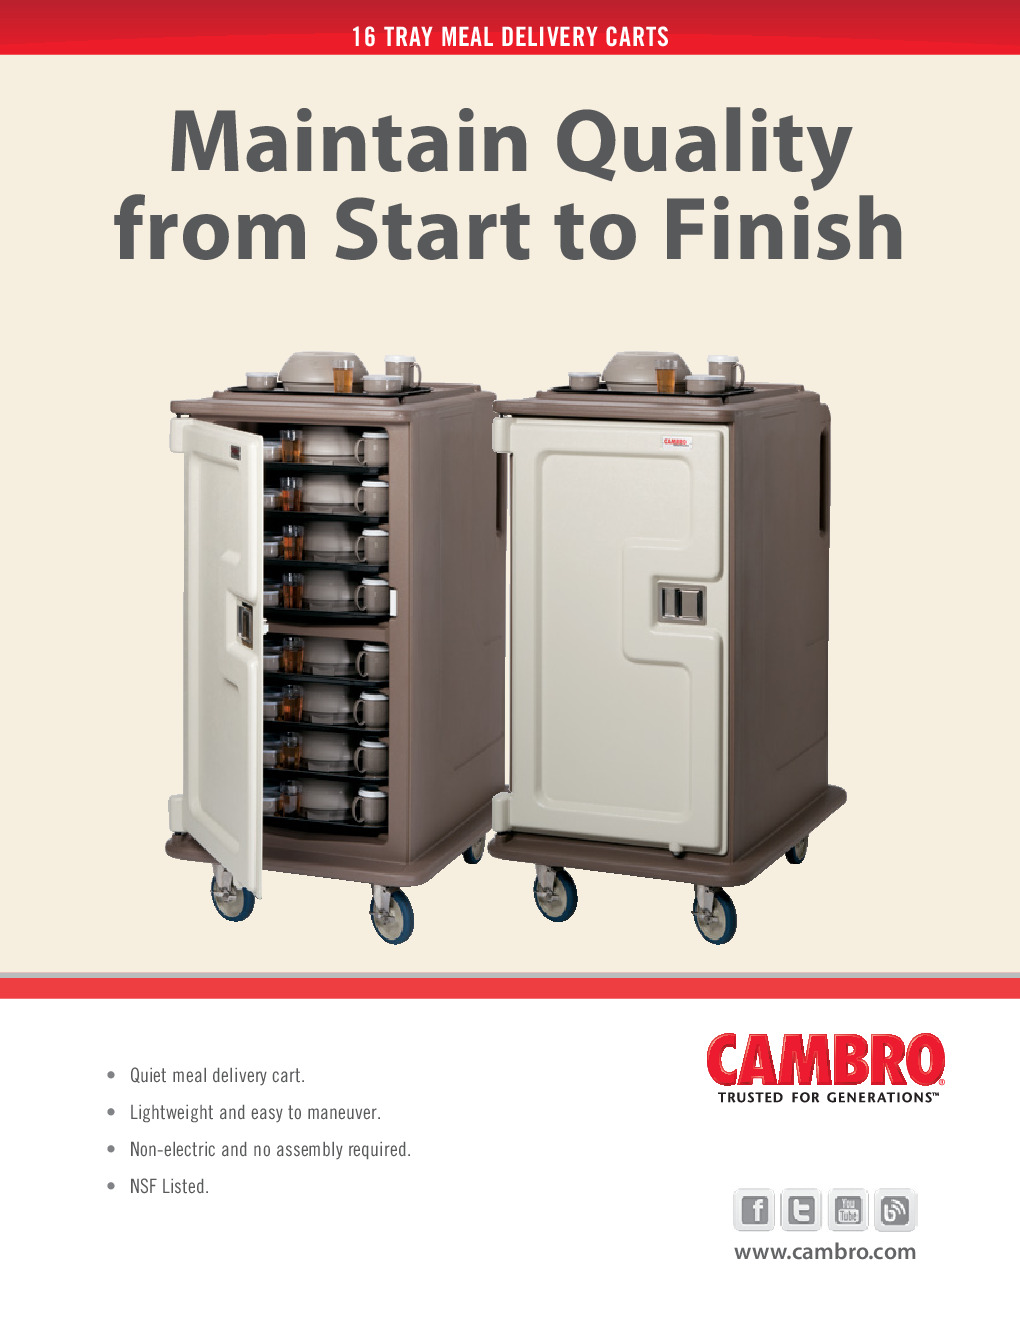 Cambro MDC1418T16191 Meal Tray Delivery Cabinet